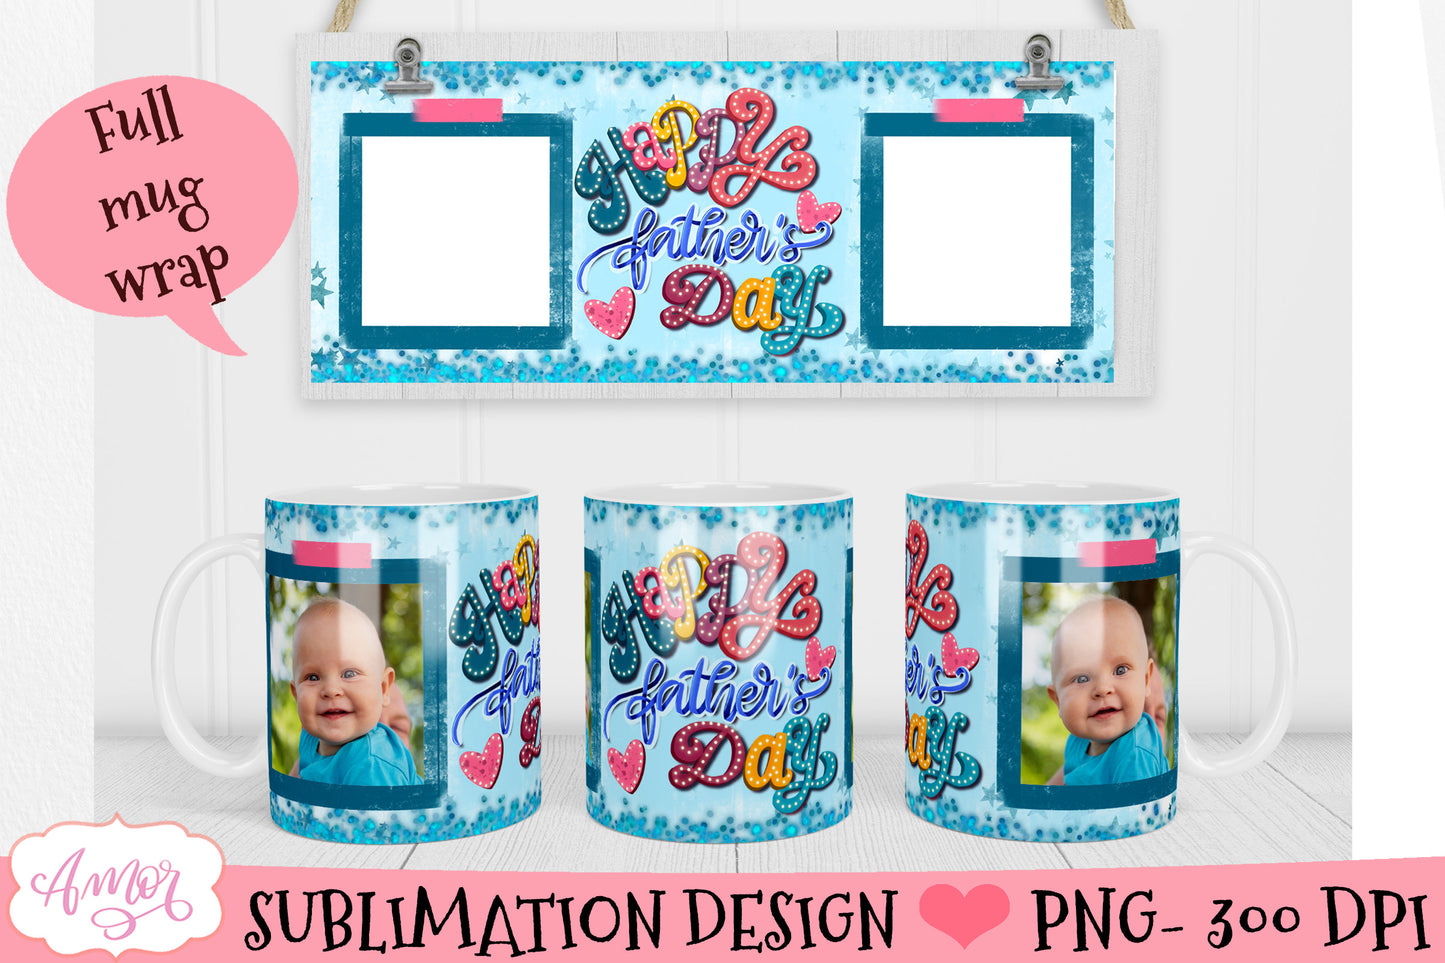 Photo mug wrap sublimation design for father's day